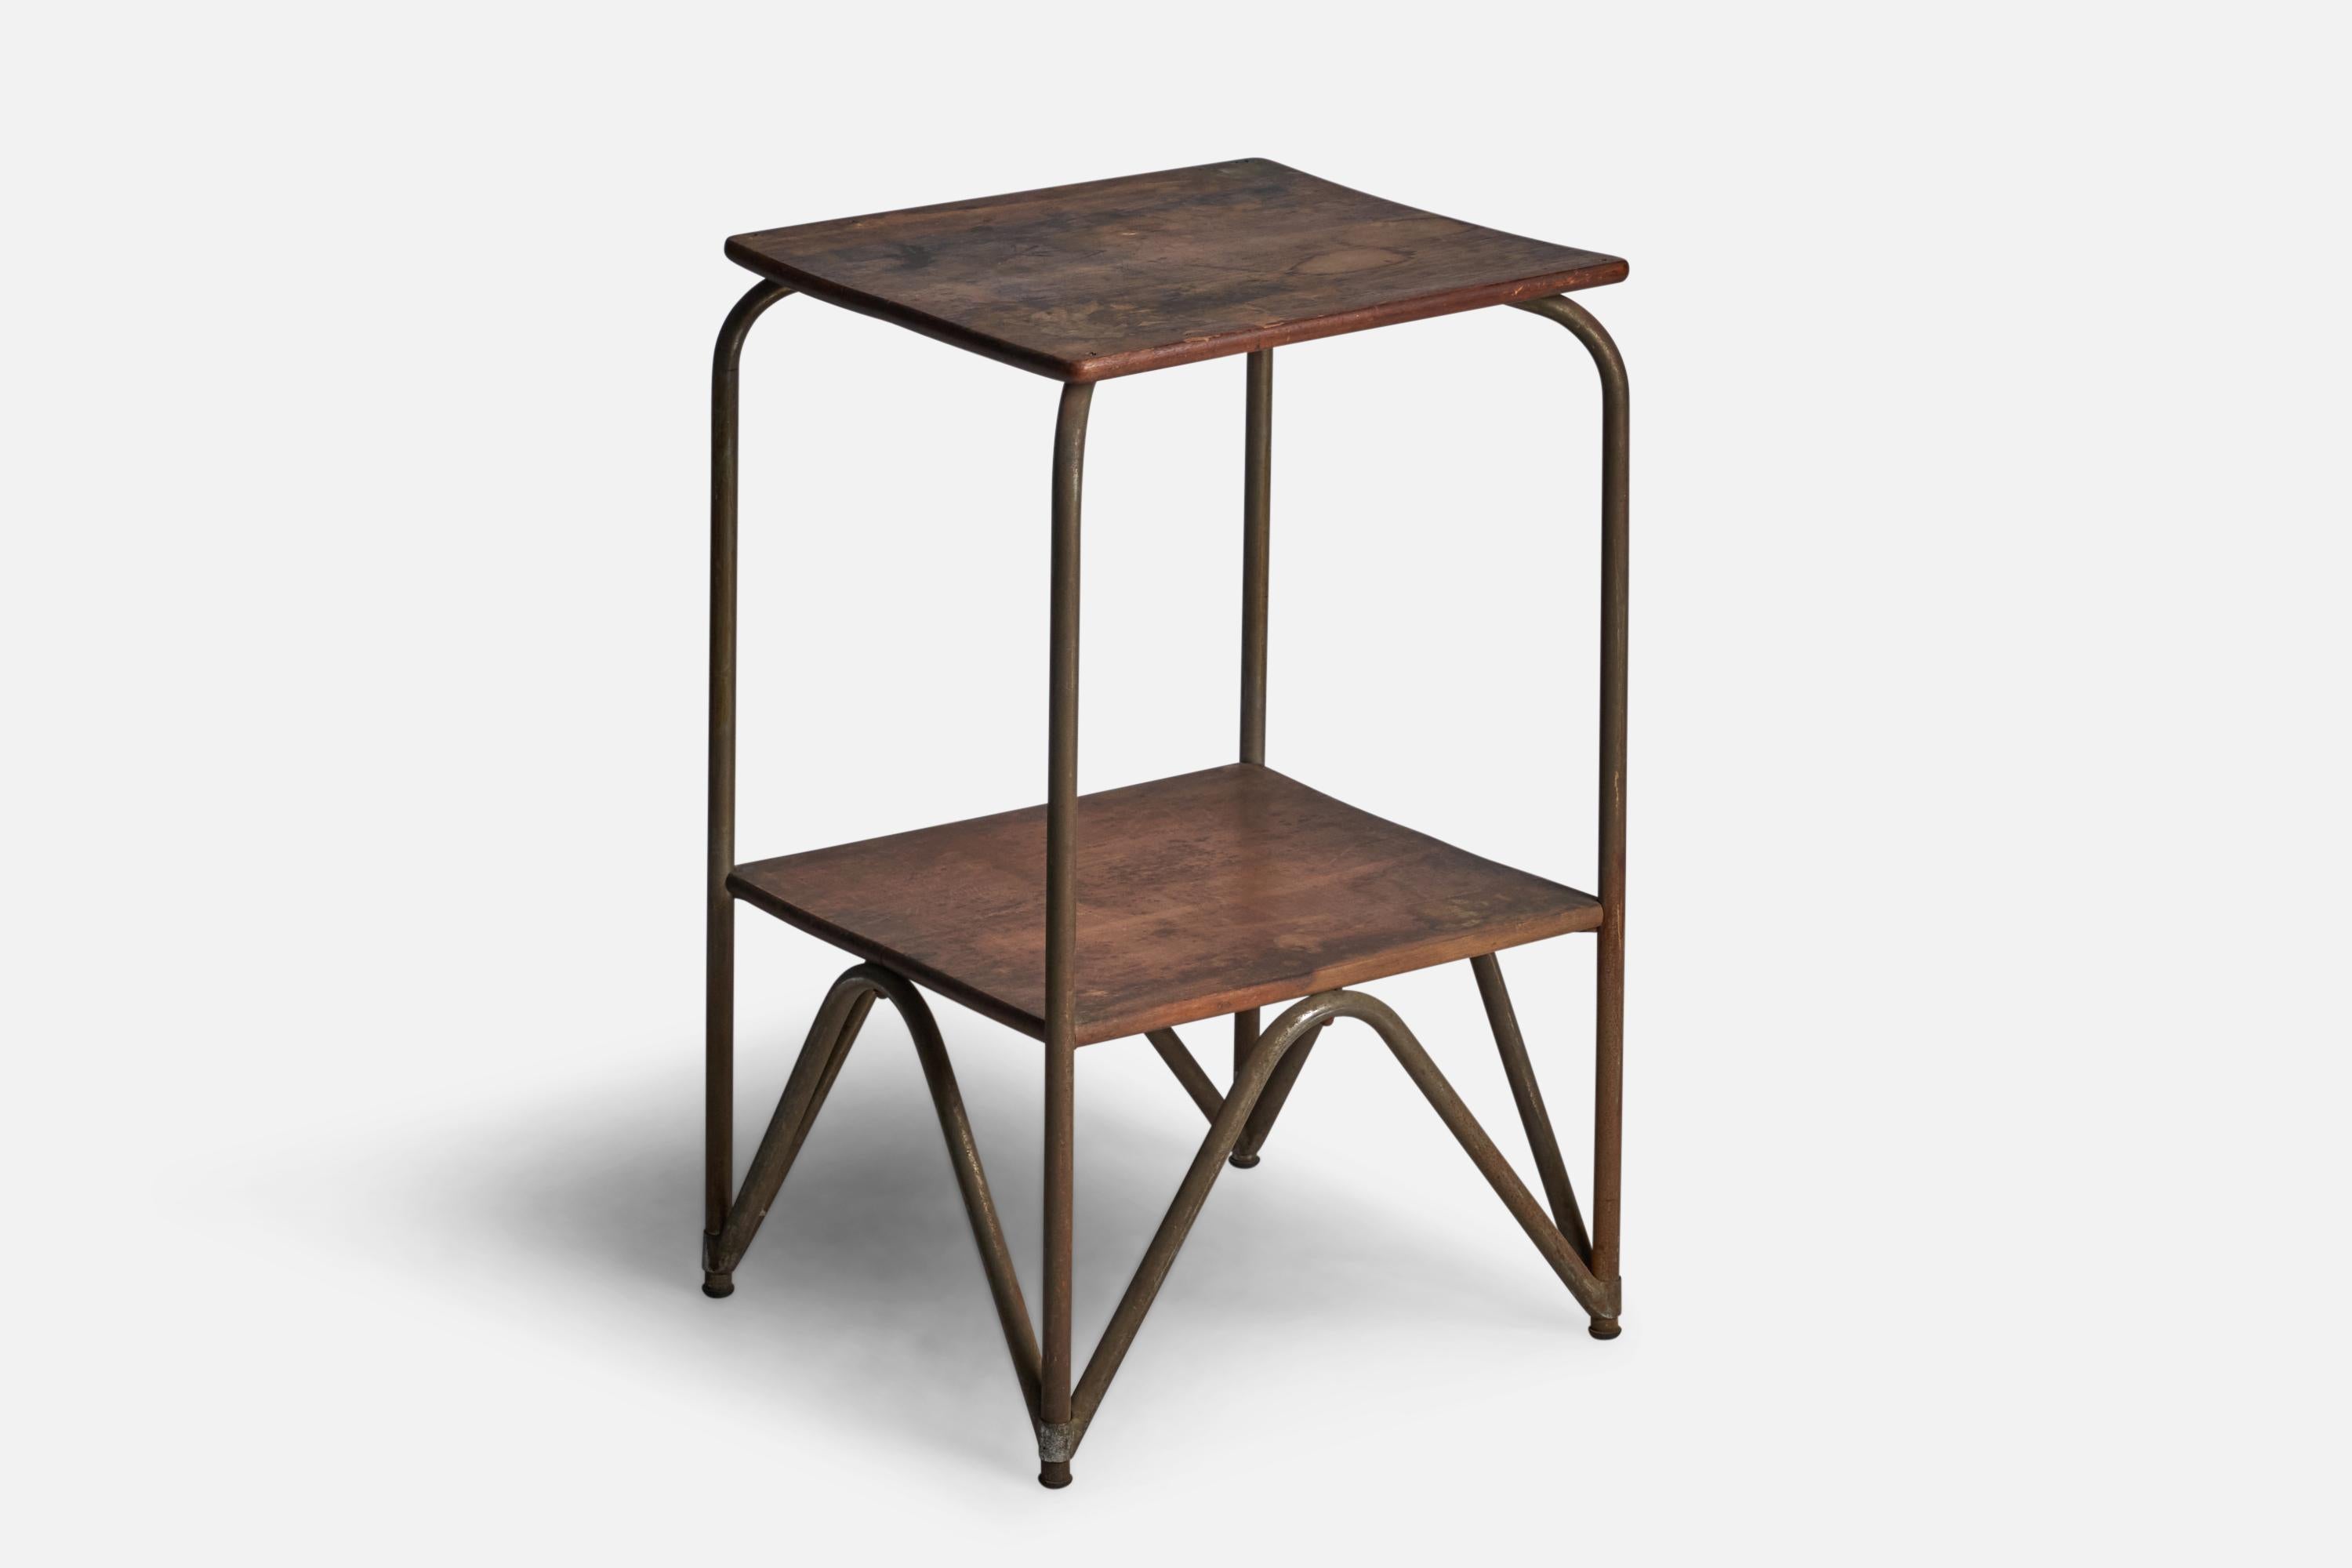 Machine Age Italian Designer, Side Table, Metal, Wood, Italy, 1930s For Sale